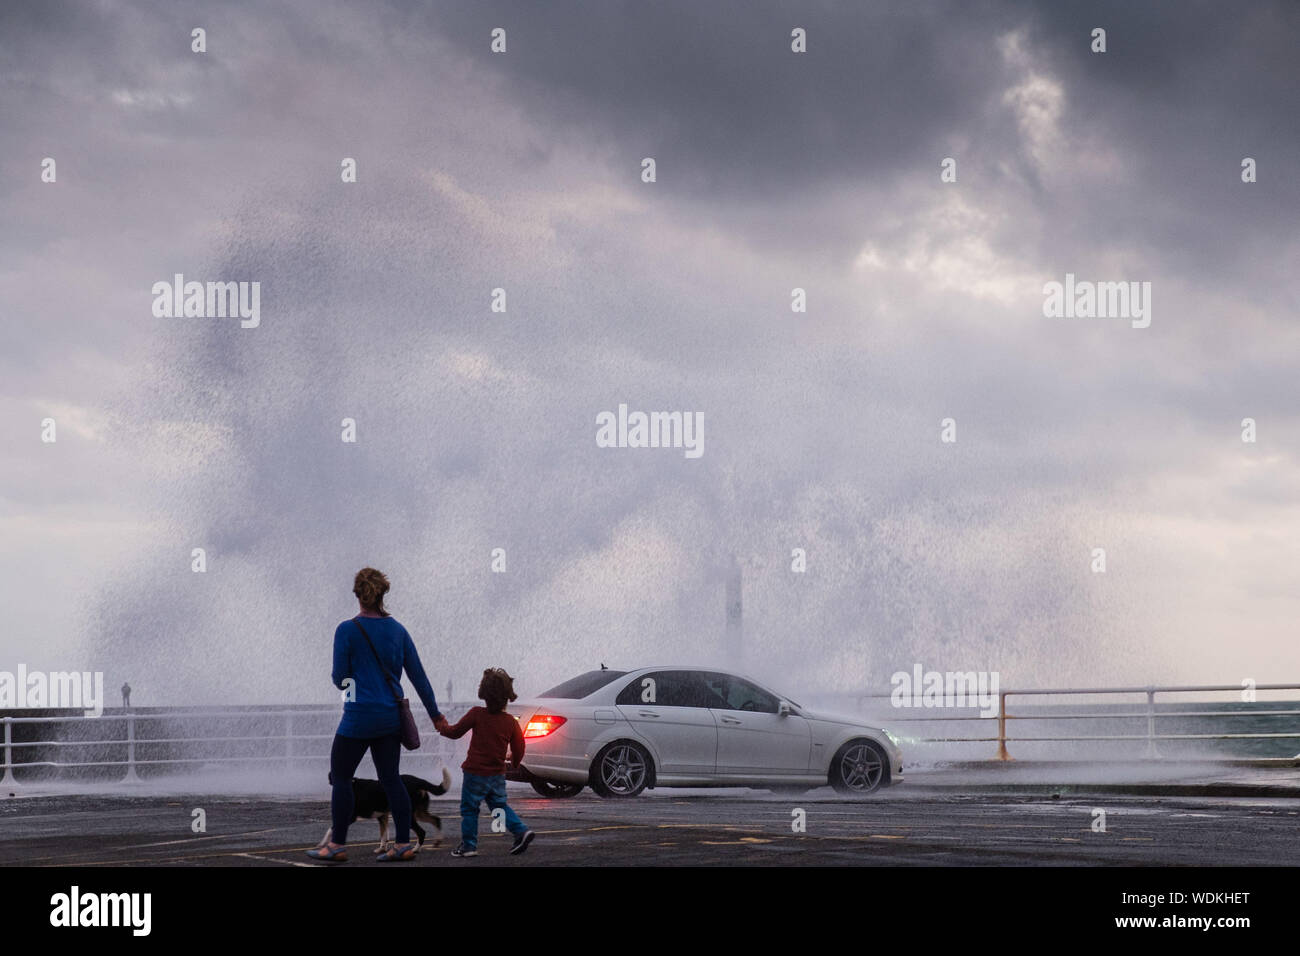 Aberystwyth Wales UK,Thursday 29 August 2019 UK Weather: Strong winds and high tides combine to drive waves crashing against the seafront in Aberystwyth, west Wales, as a period of unsettled weather dominates the UK after the record breaking hot  August Bank Holiday weekend. Photo credit Keith Morris / Alamy Live News Stock Photo